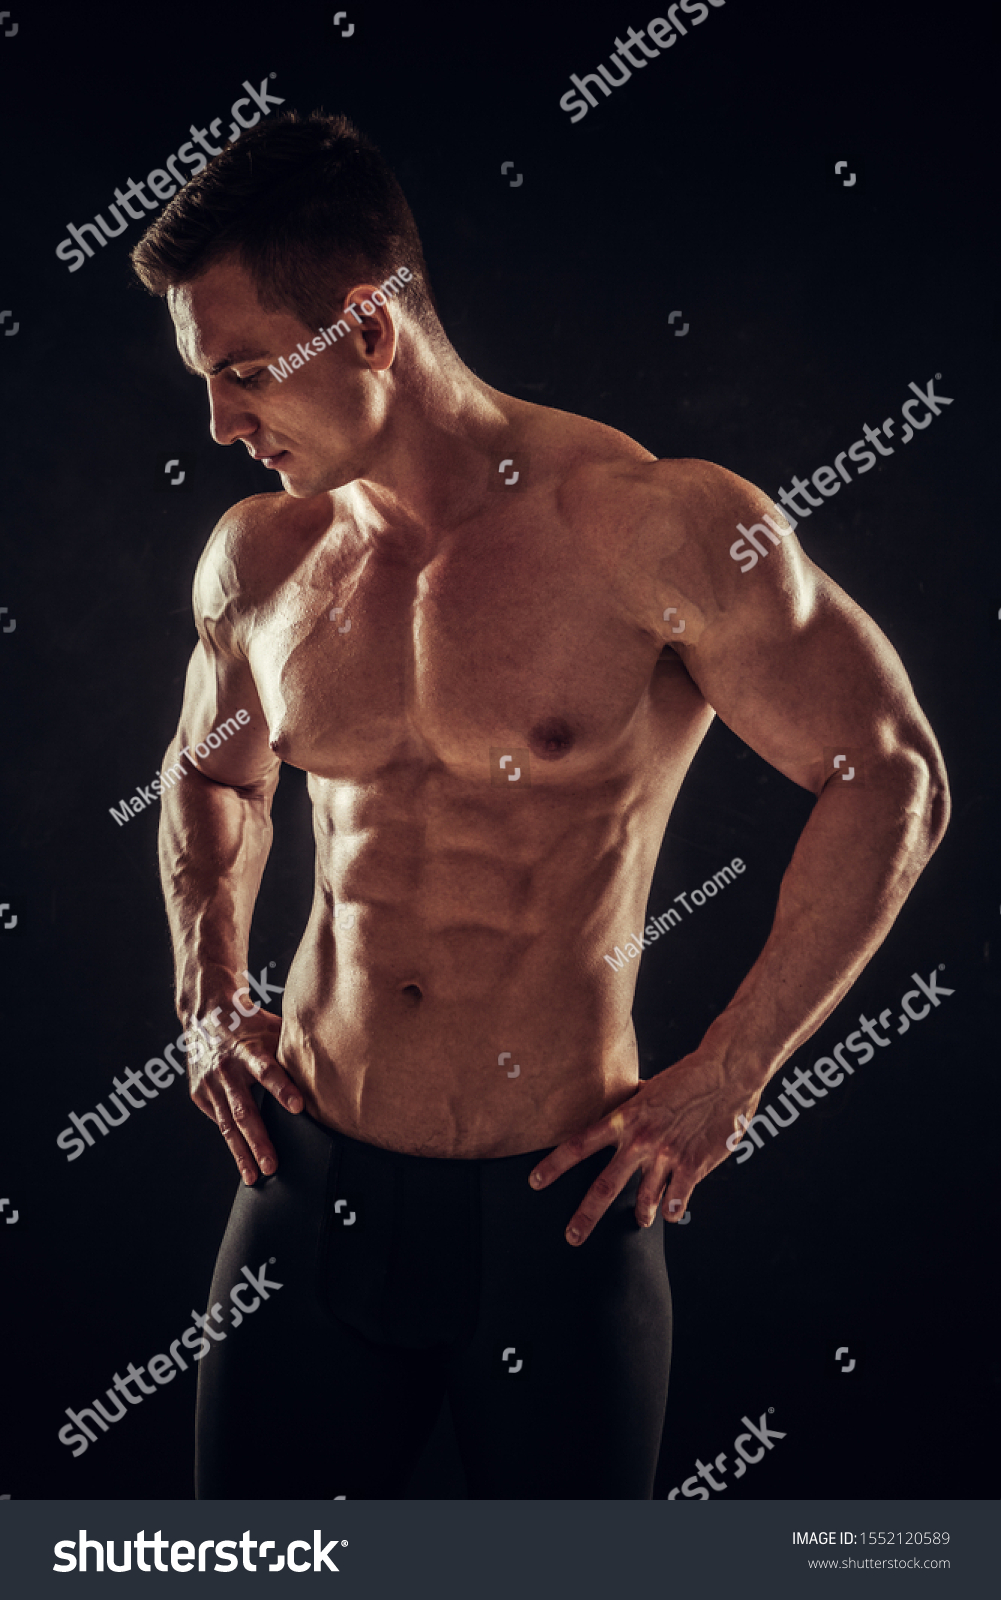 Handsome athletic man showing his trained body on dark background #1552120589